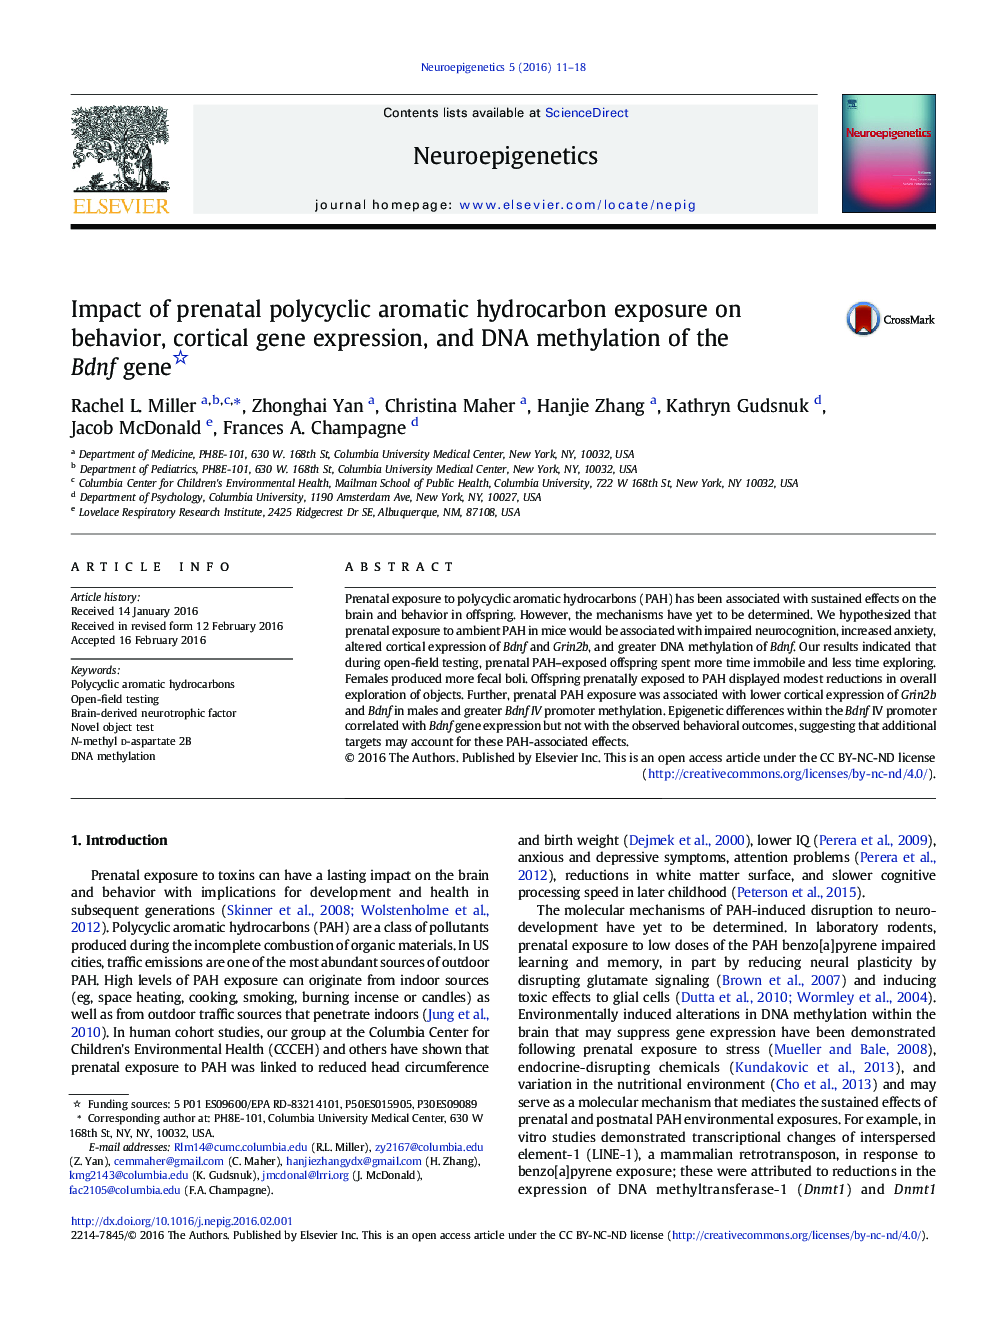 Impact of prenatal polycyclic aromatic hydrocarbon exposure on behavior, cortical gene expression, and DNA methylation of the Bdnf gene 